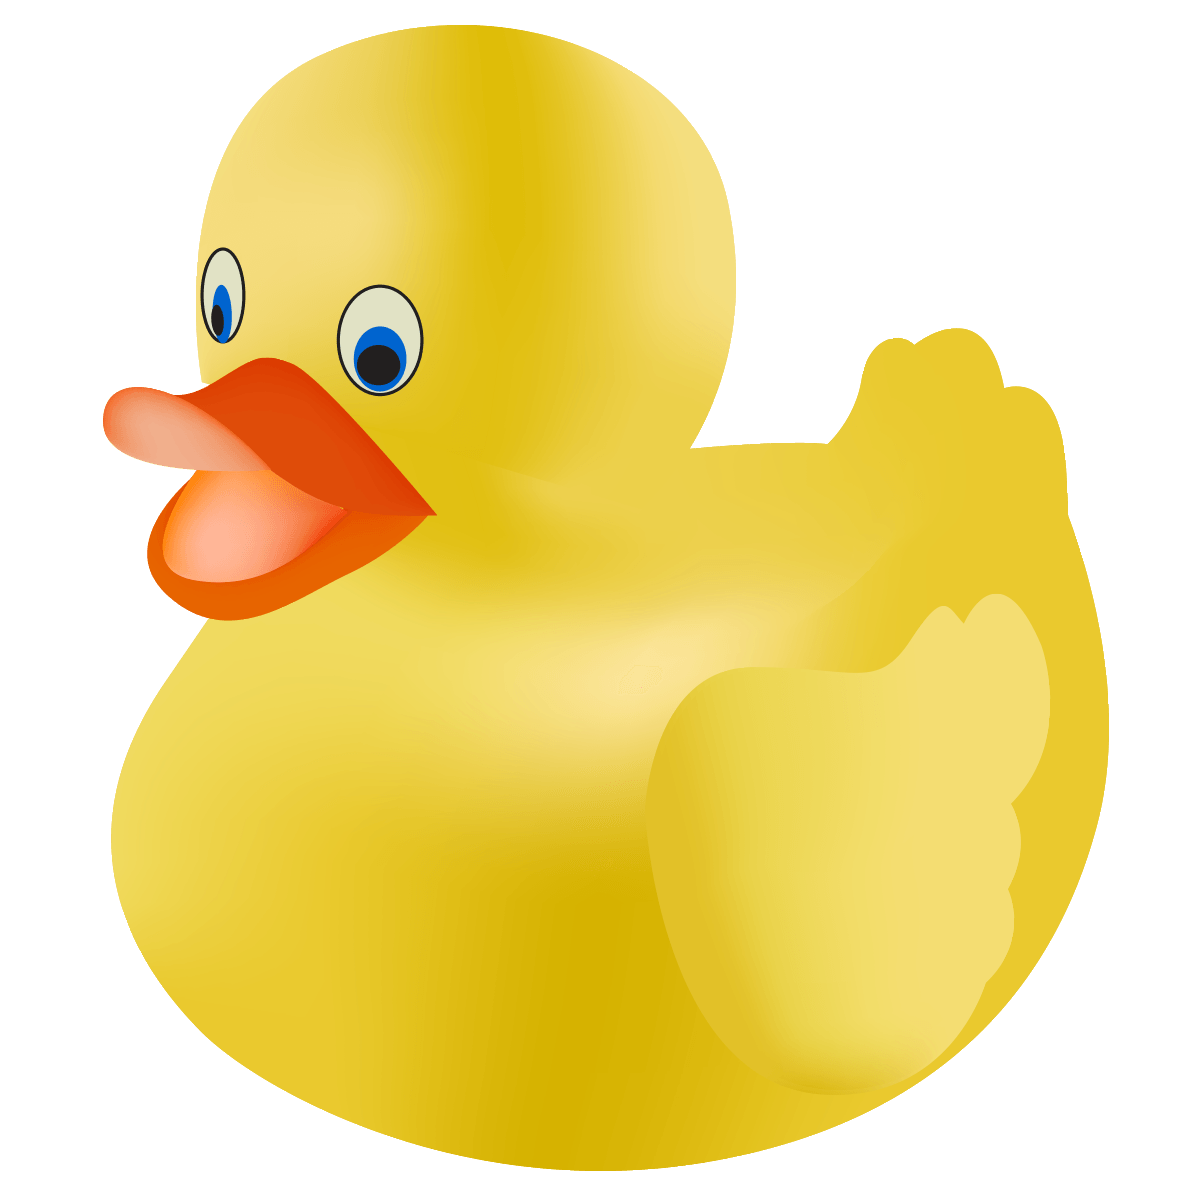 Free Rubber Ducky Cliparts, Download Free Clip Art, Free.